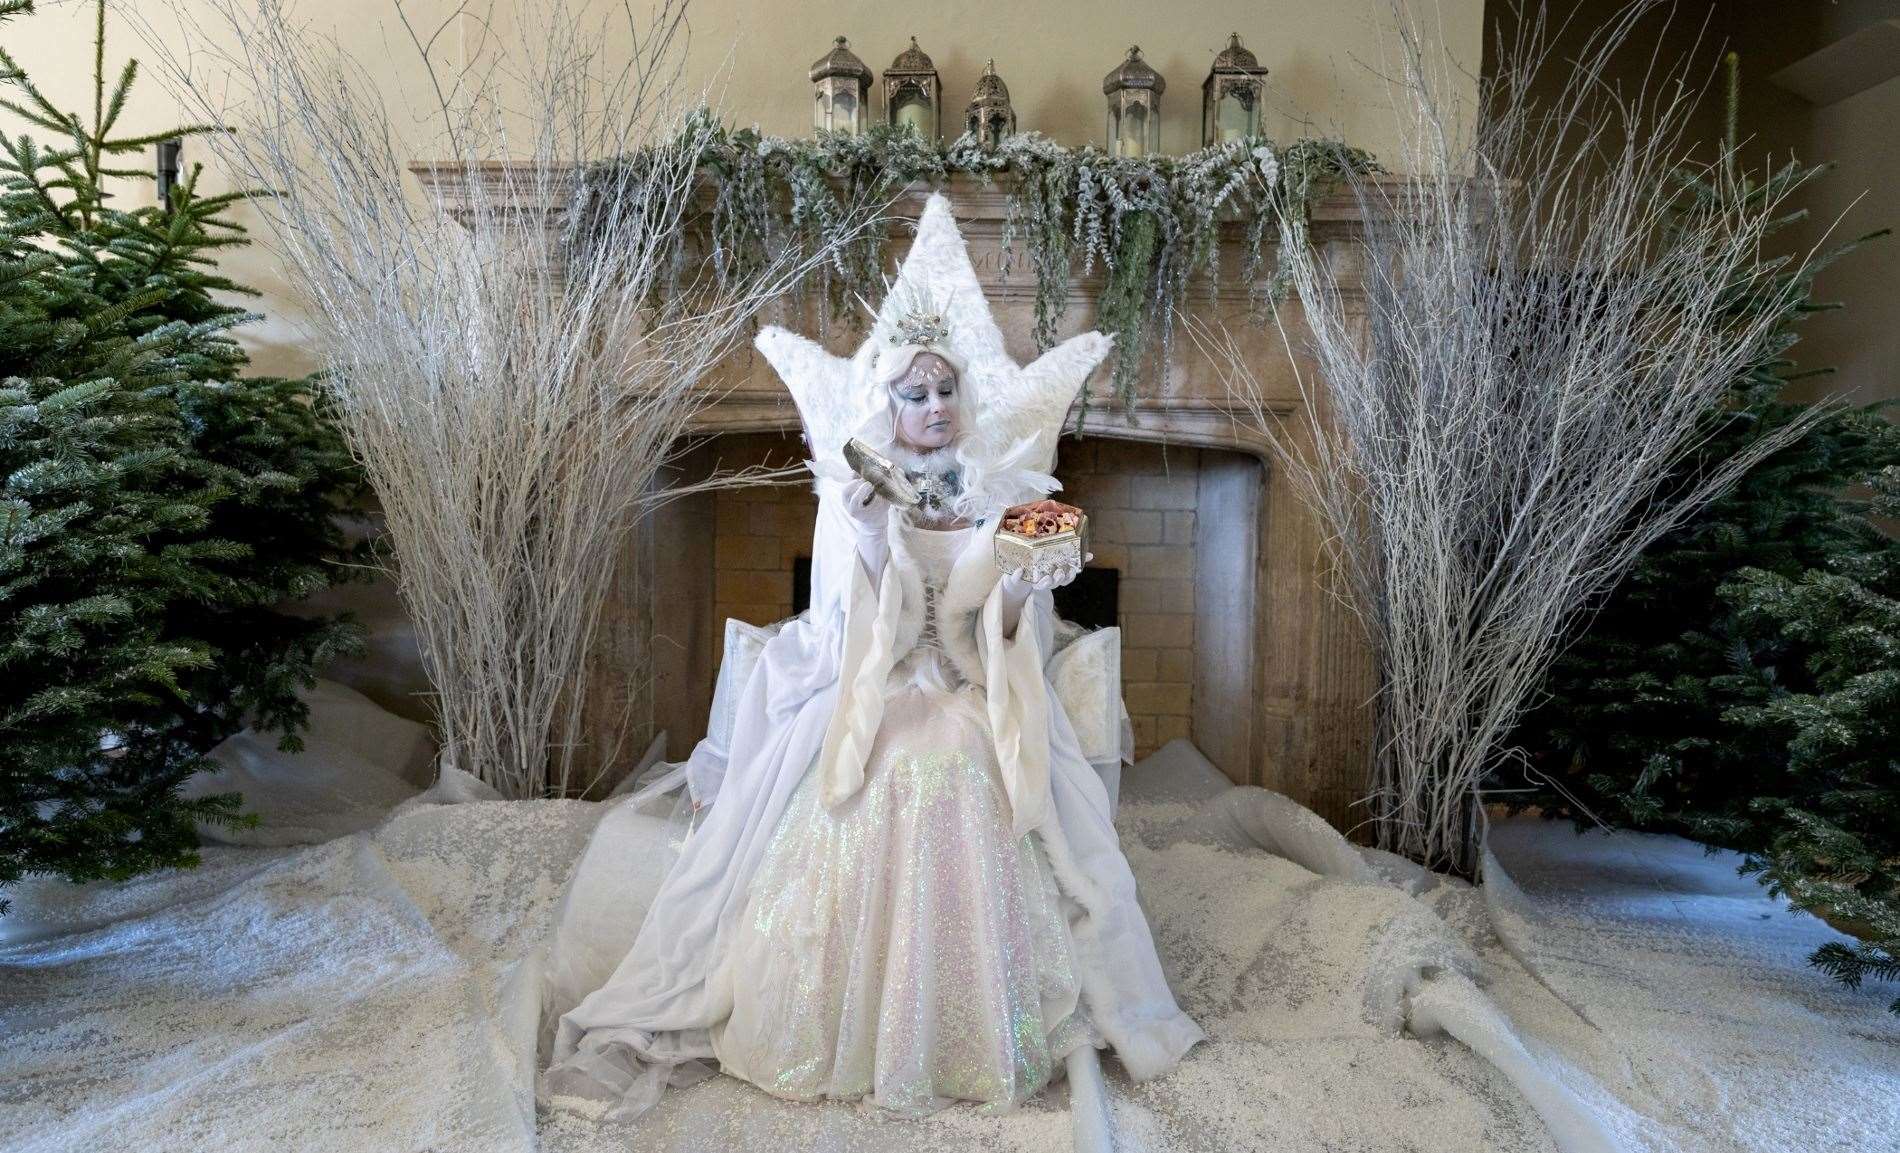 The classic tale of The Lion, the Witch and the Wardrobe is coming to Leeds Castle this Christmas. Picture: Leeds Castle